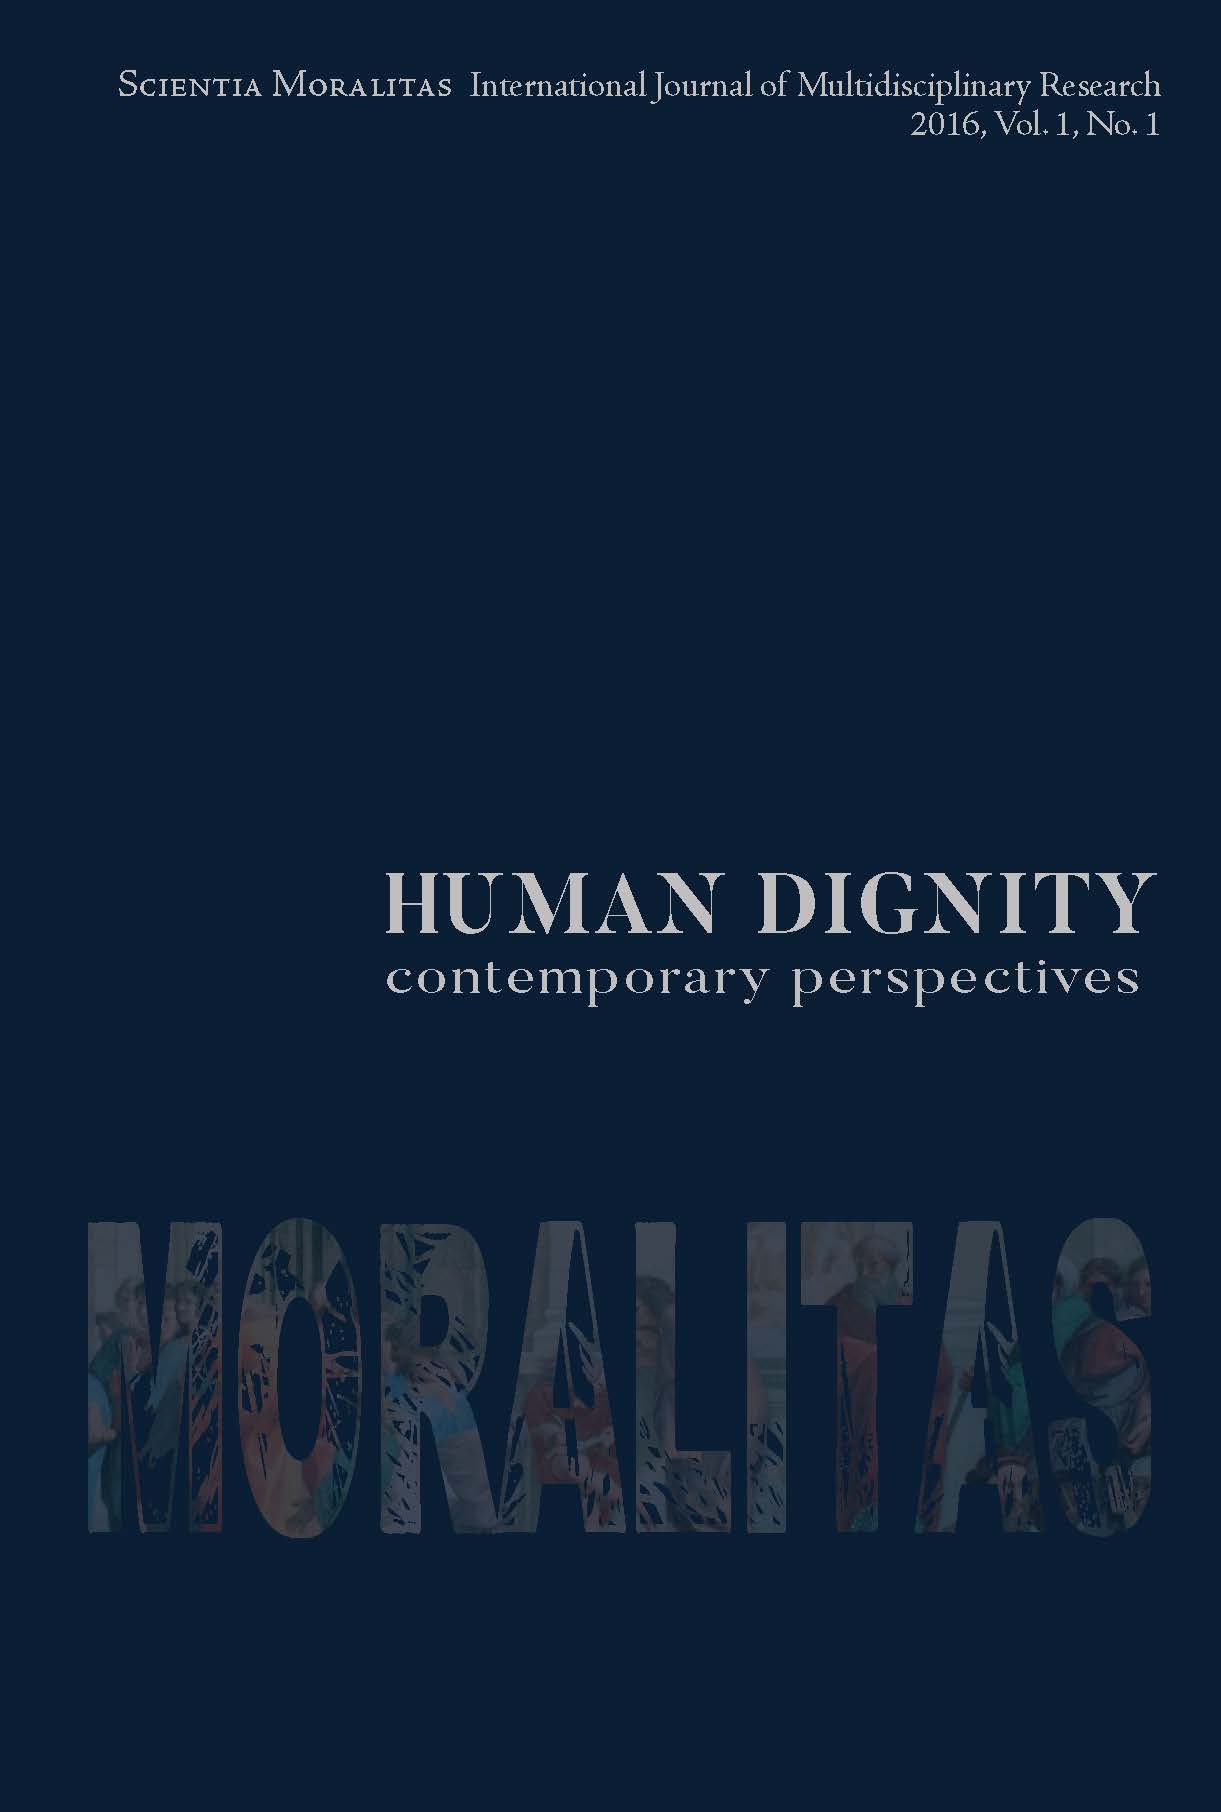 Communication of Human Dignity
—An approach on human rights Cover Image